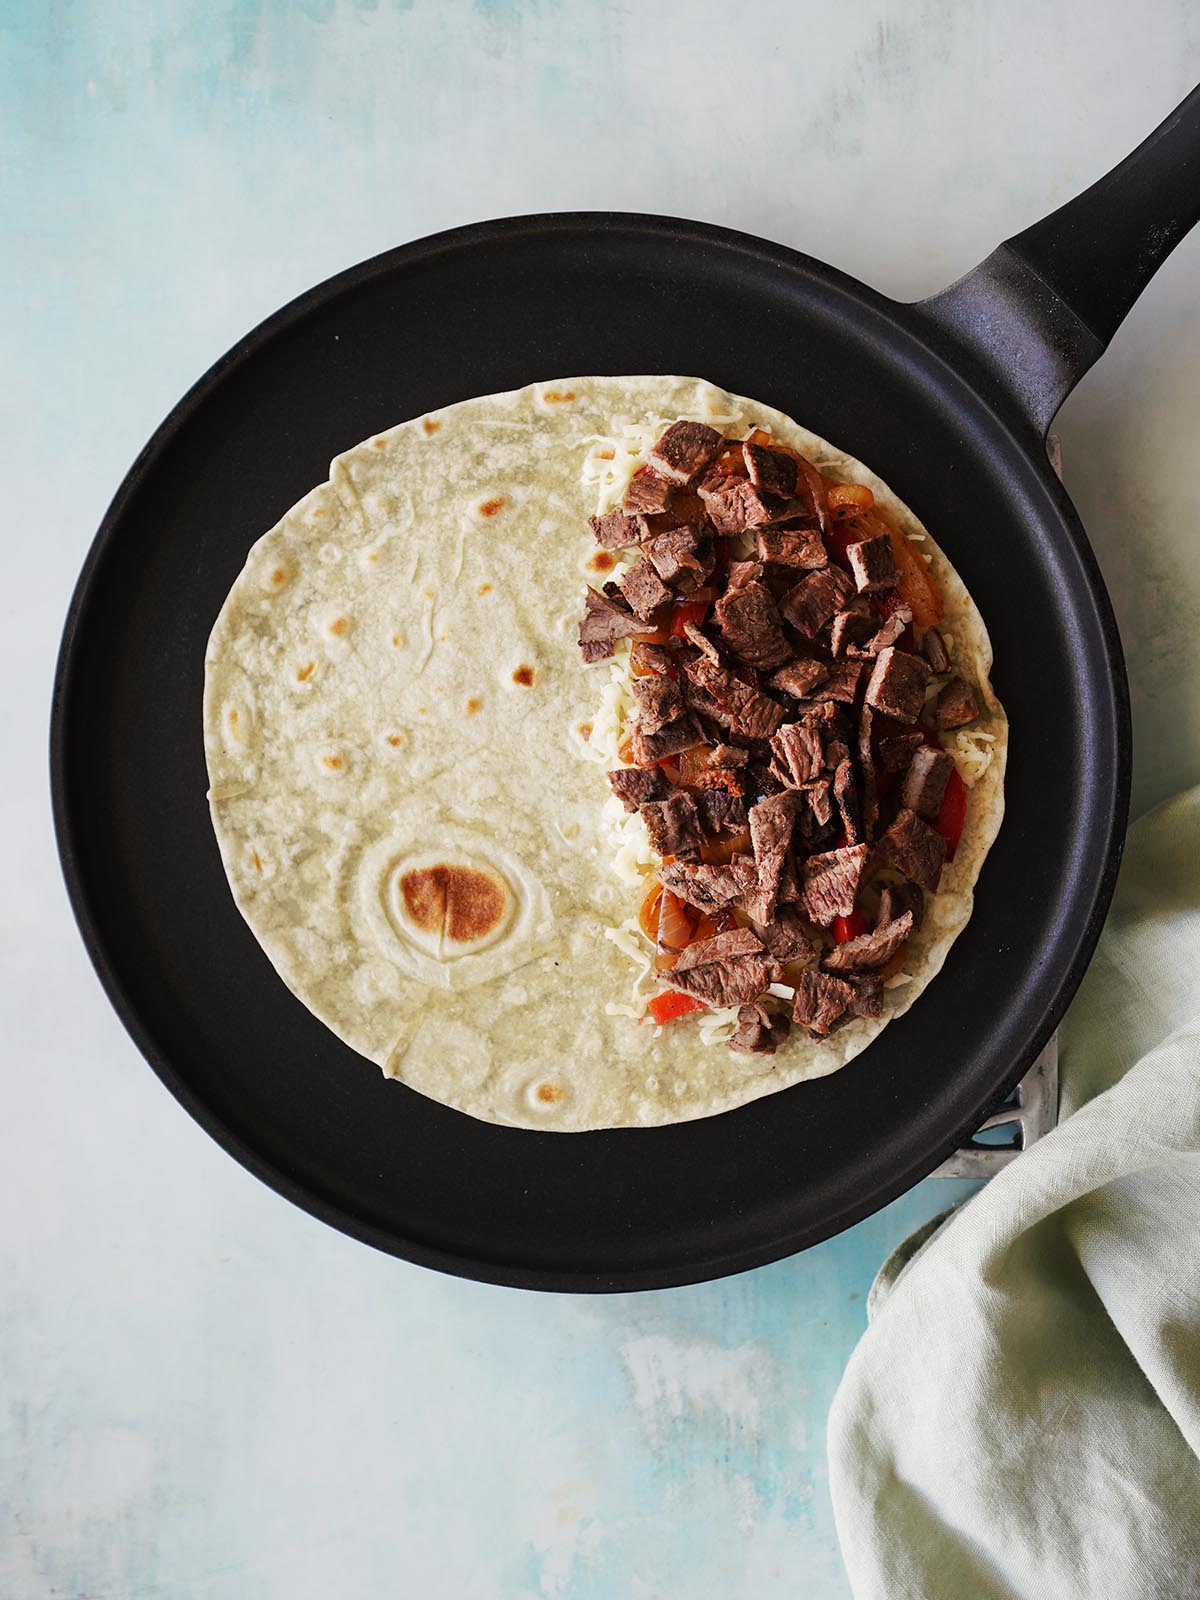 A flour tortilla topped with cheese, sauteed veggies, chopped steak on a skillet.